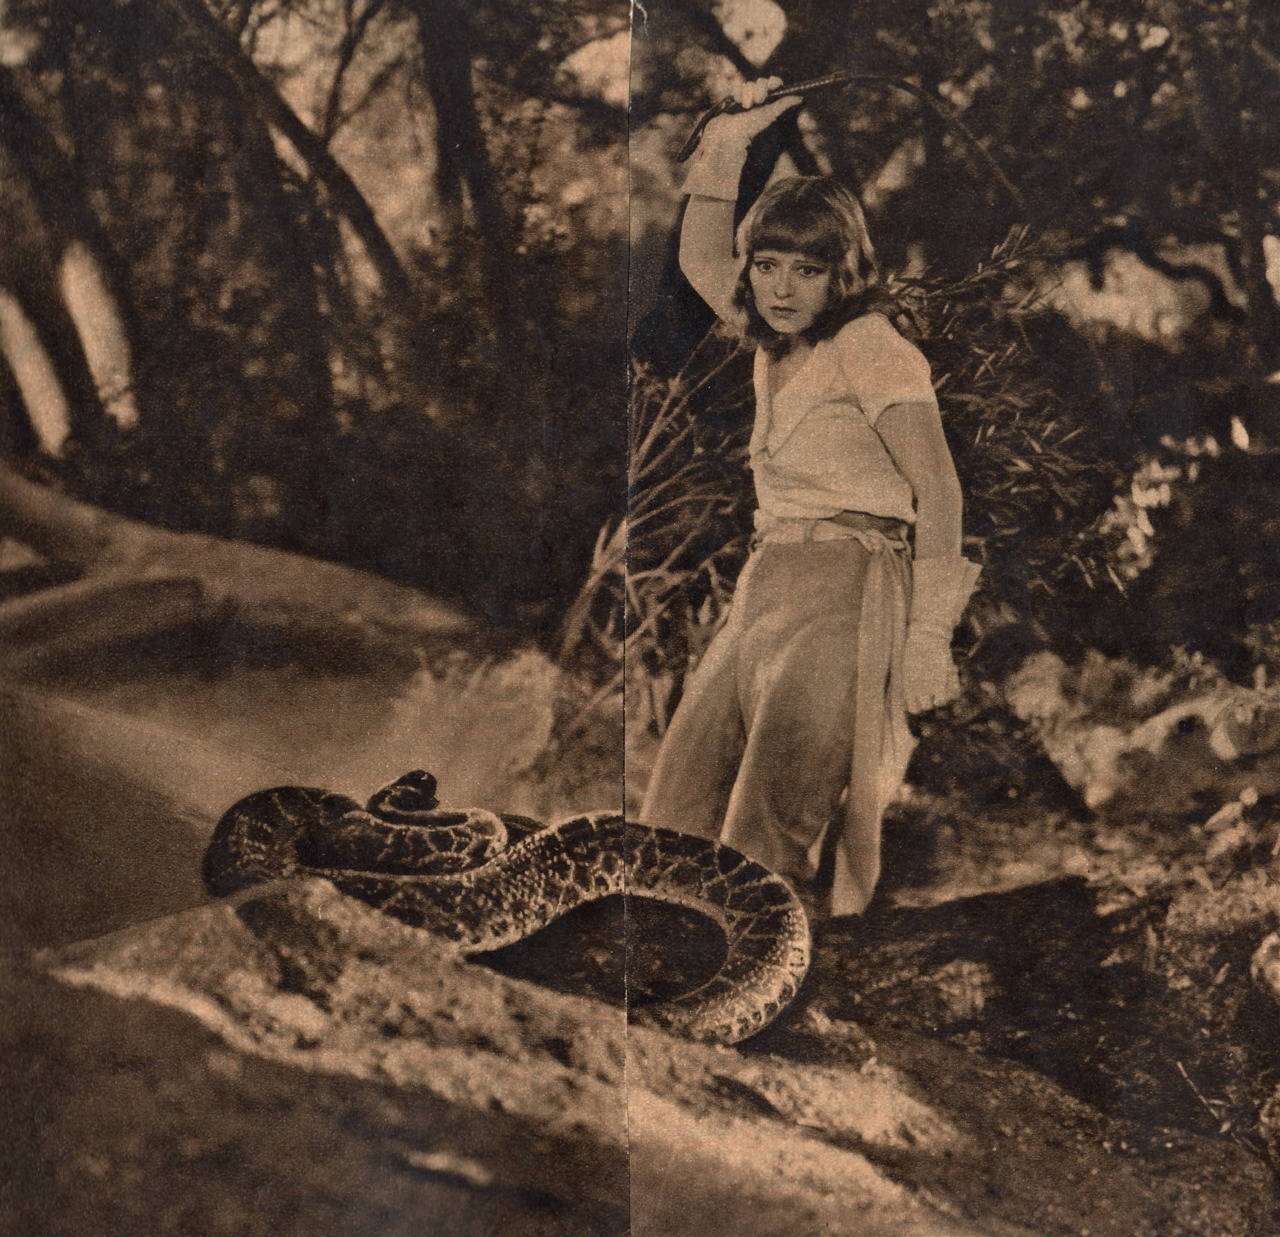 Clara Bow Enthralling with a Giant Snake Wallpaper